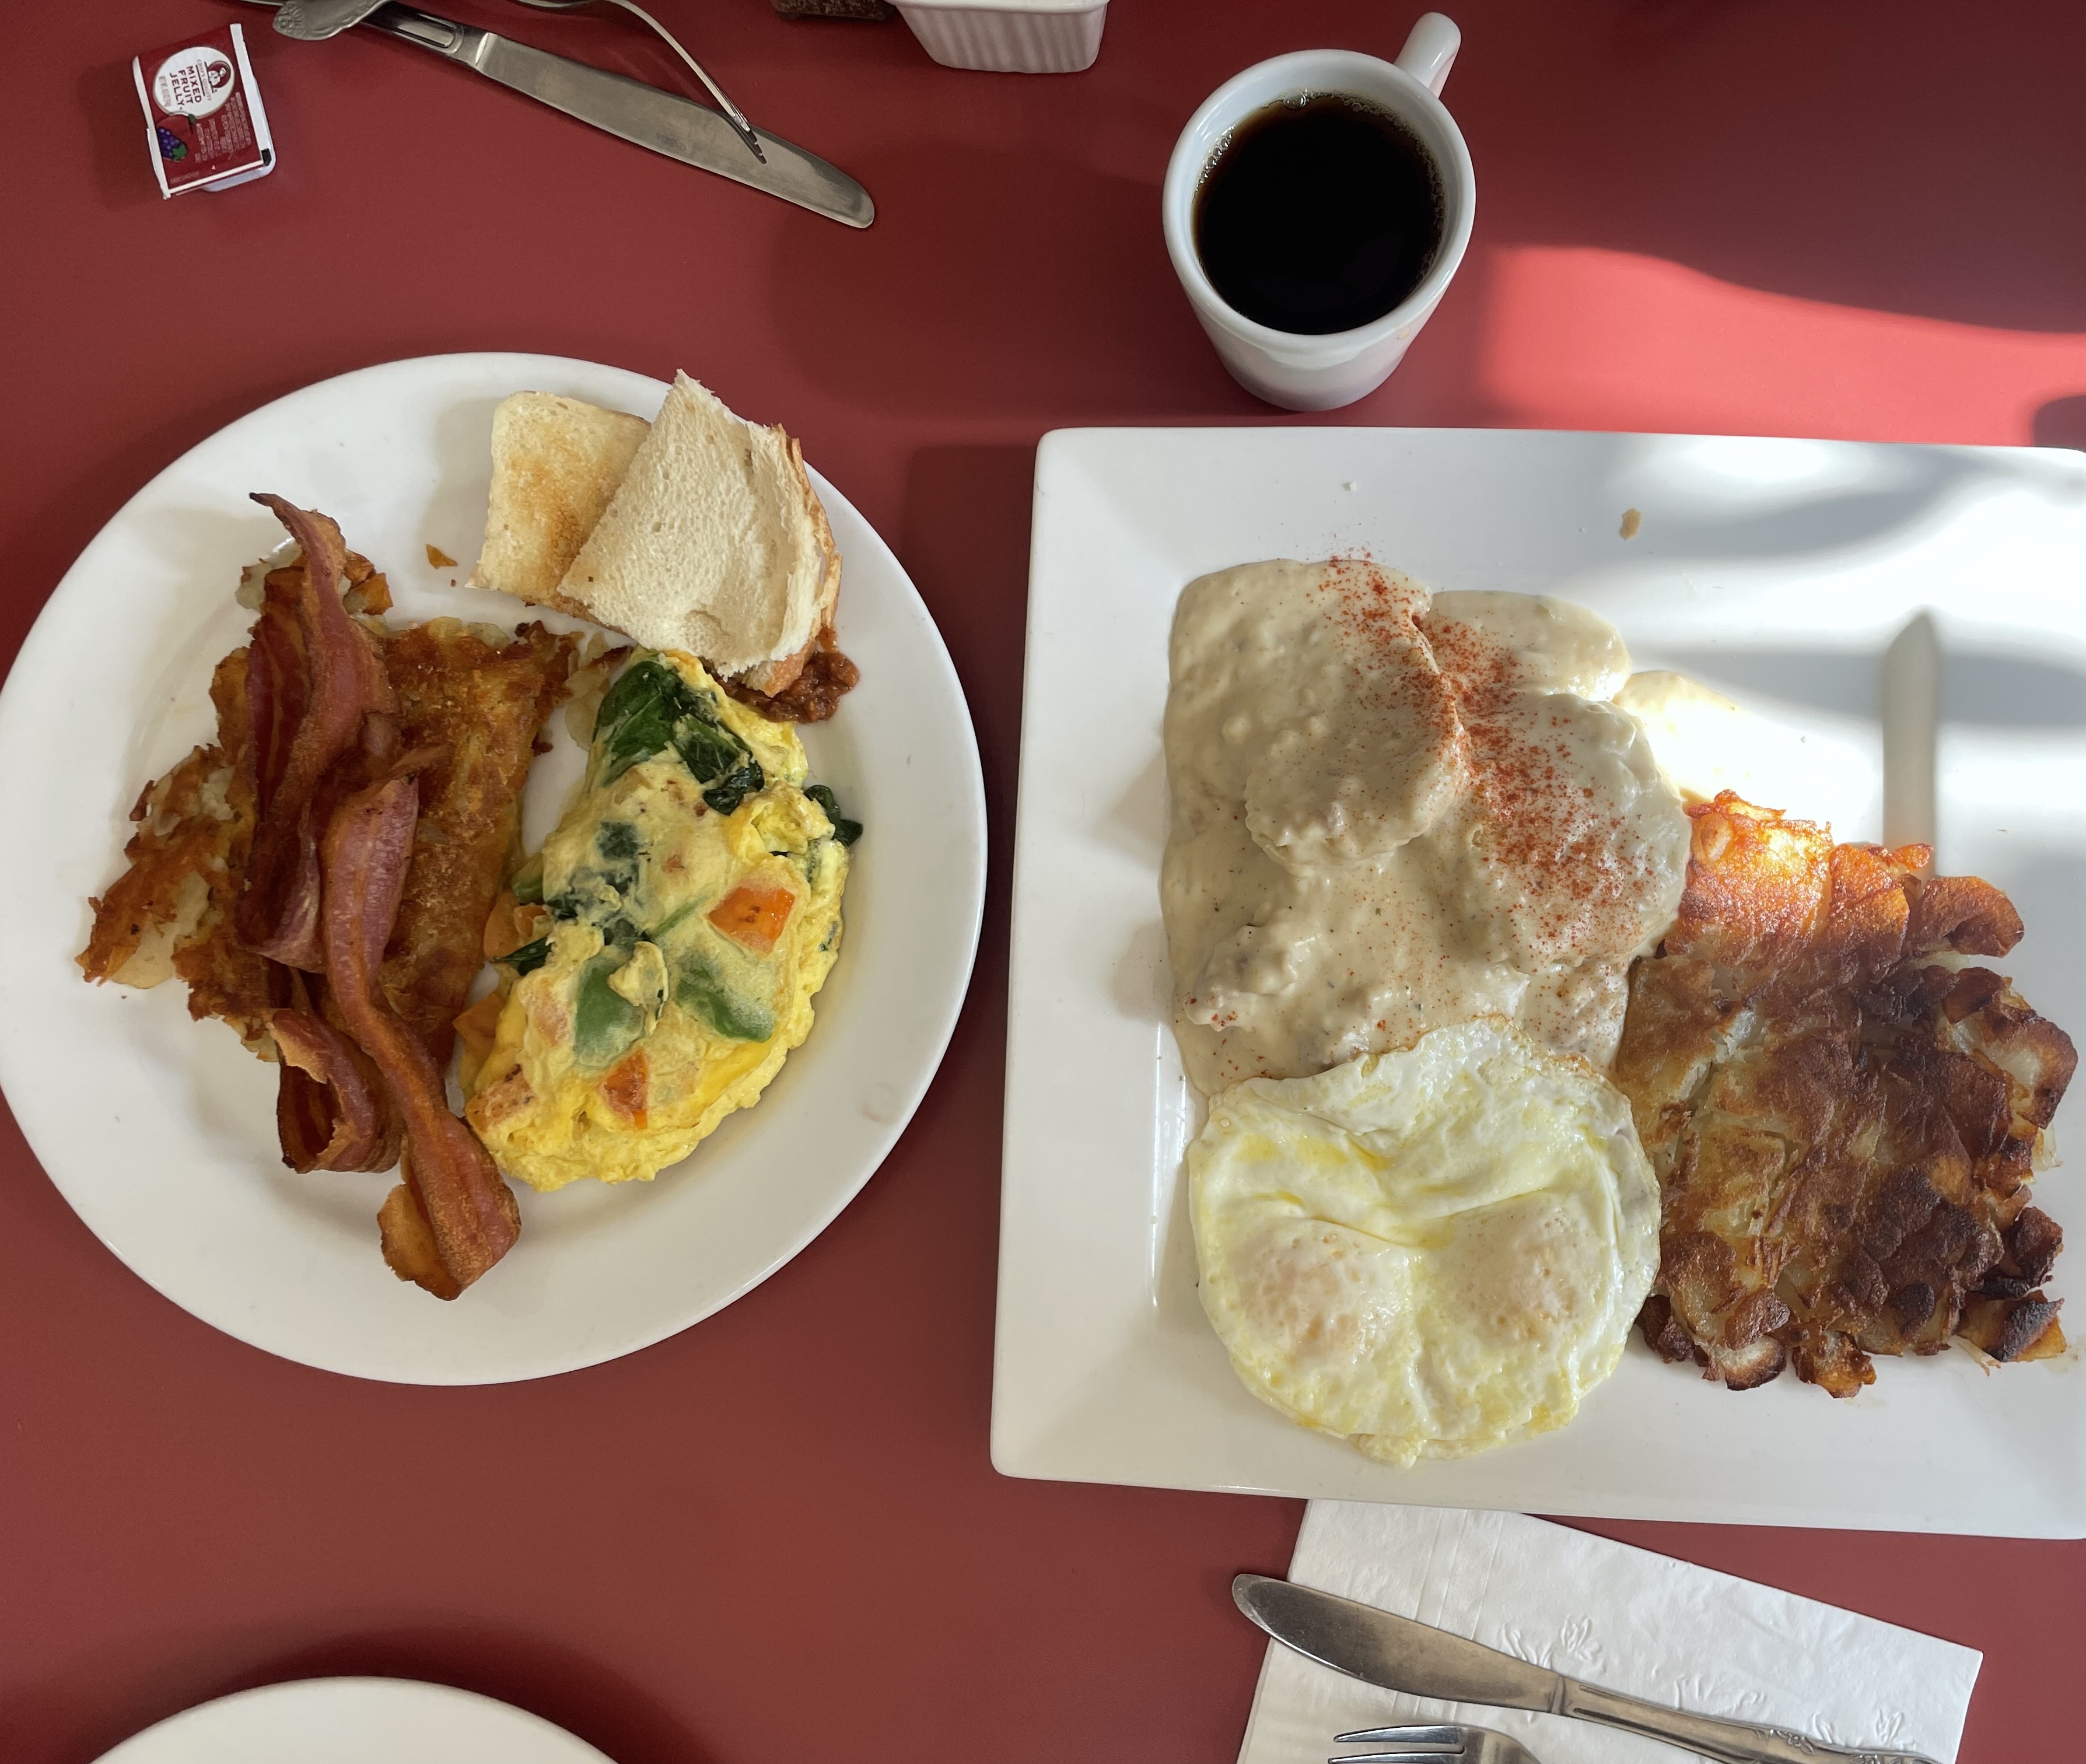 Two breakfast plates on a red table: one with an omelette, bacon, toast; another with eggs, gravy-covered biscuit, hash browns, and coffee.